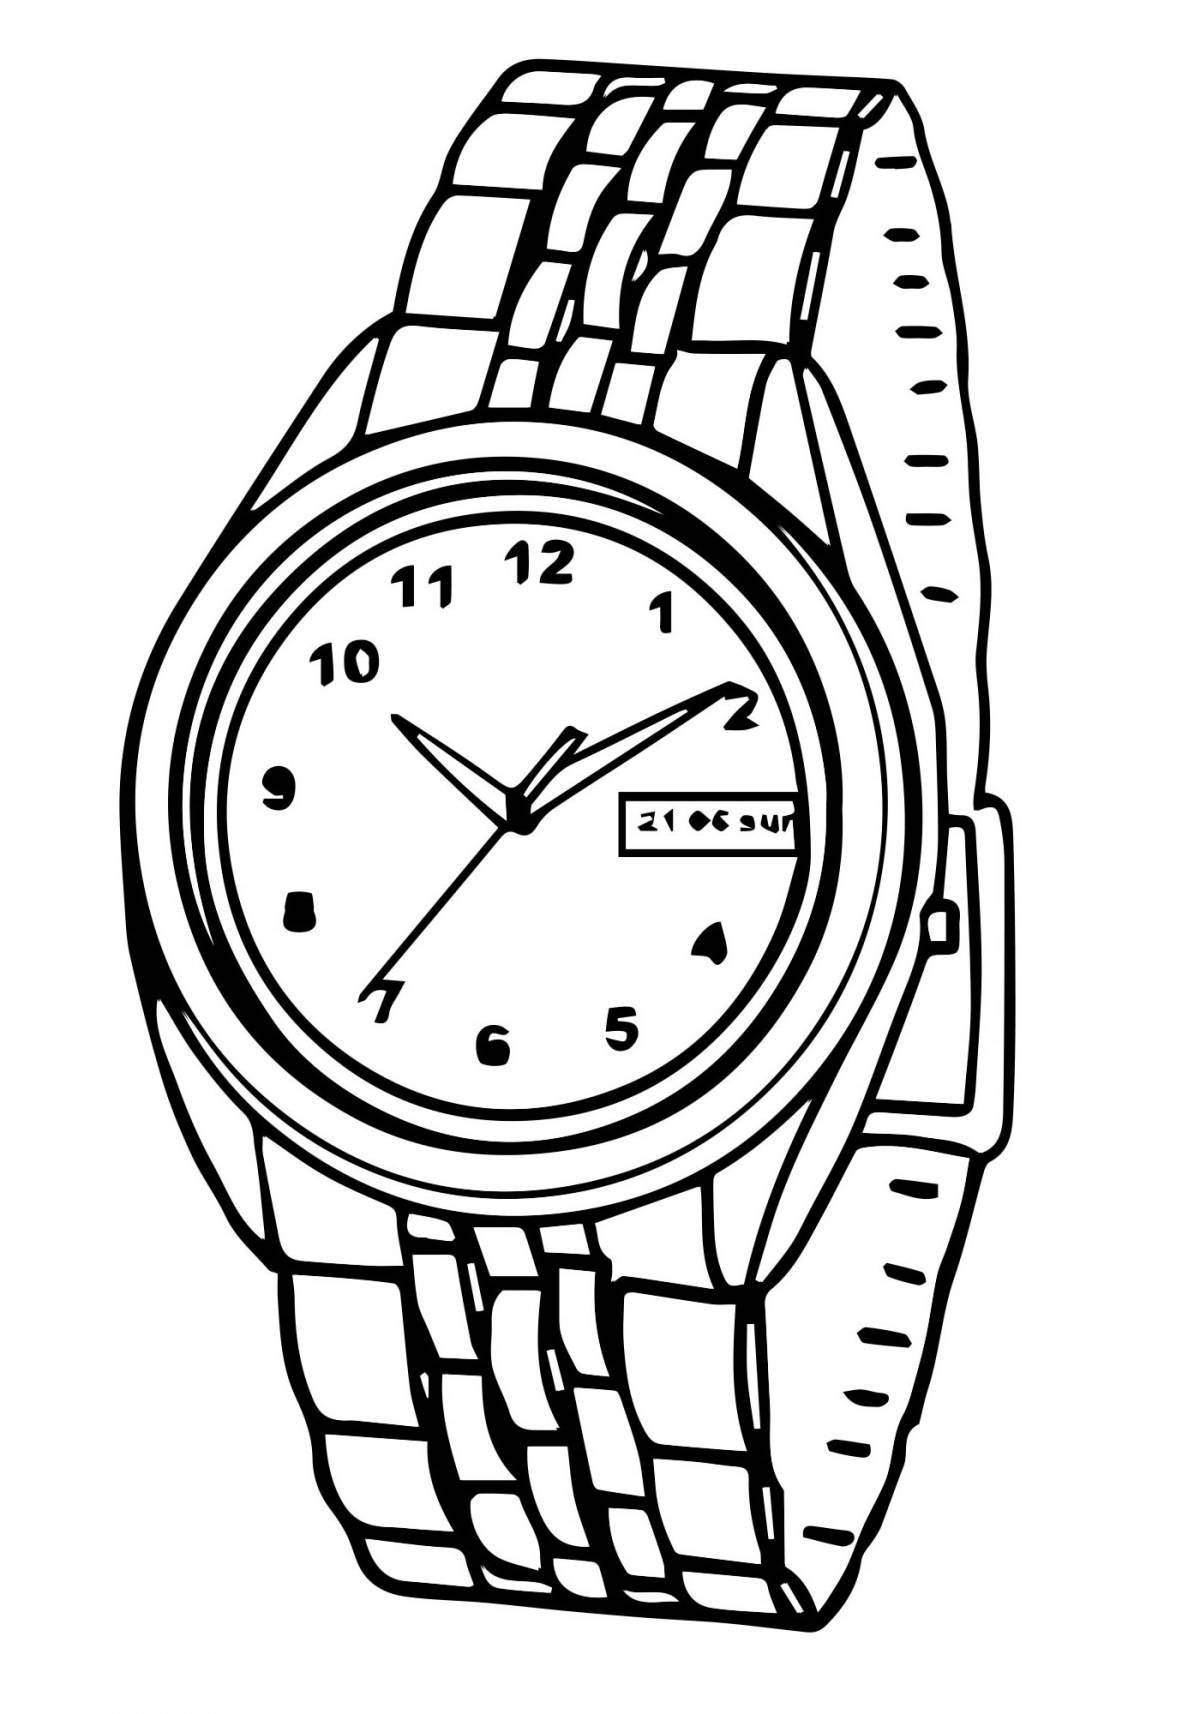 Coloring book funny watch